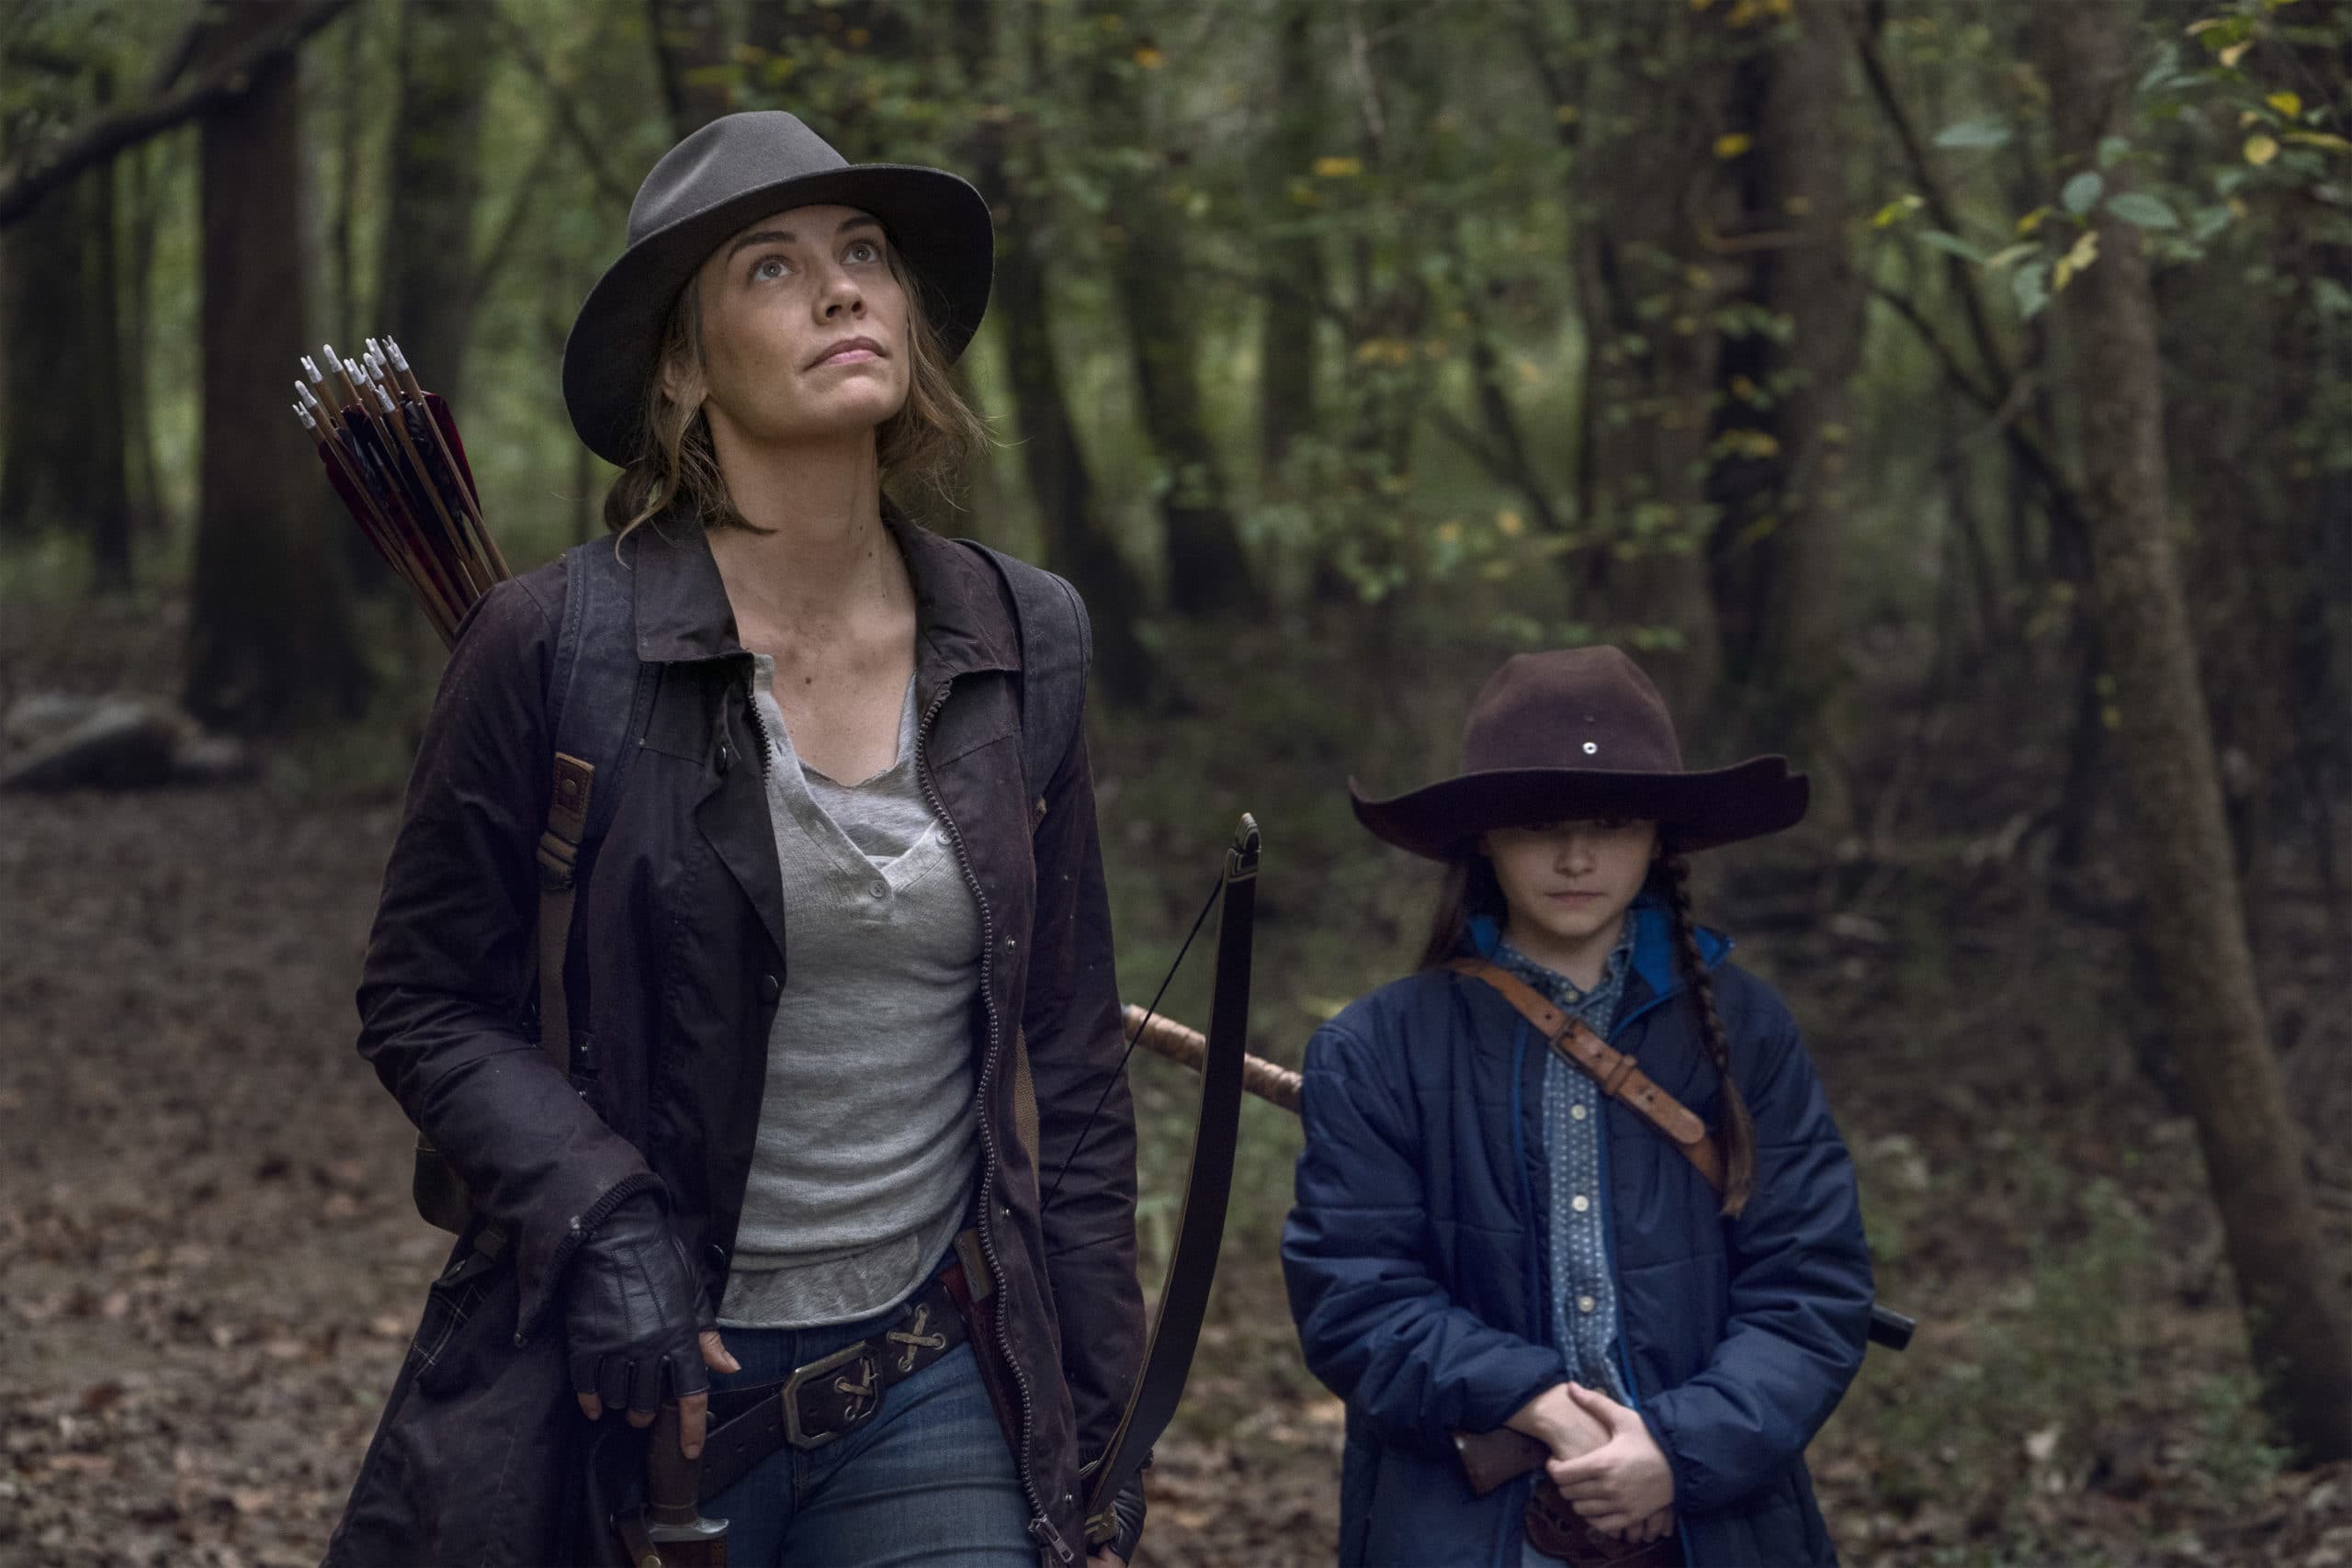 Lauren Cohan as Maggie Greene and Cailey Fleming as Judith Grimes